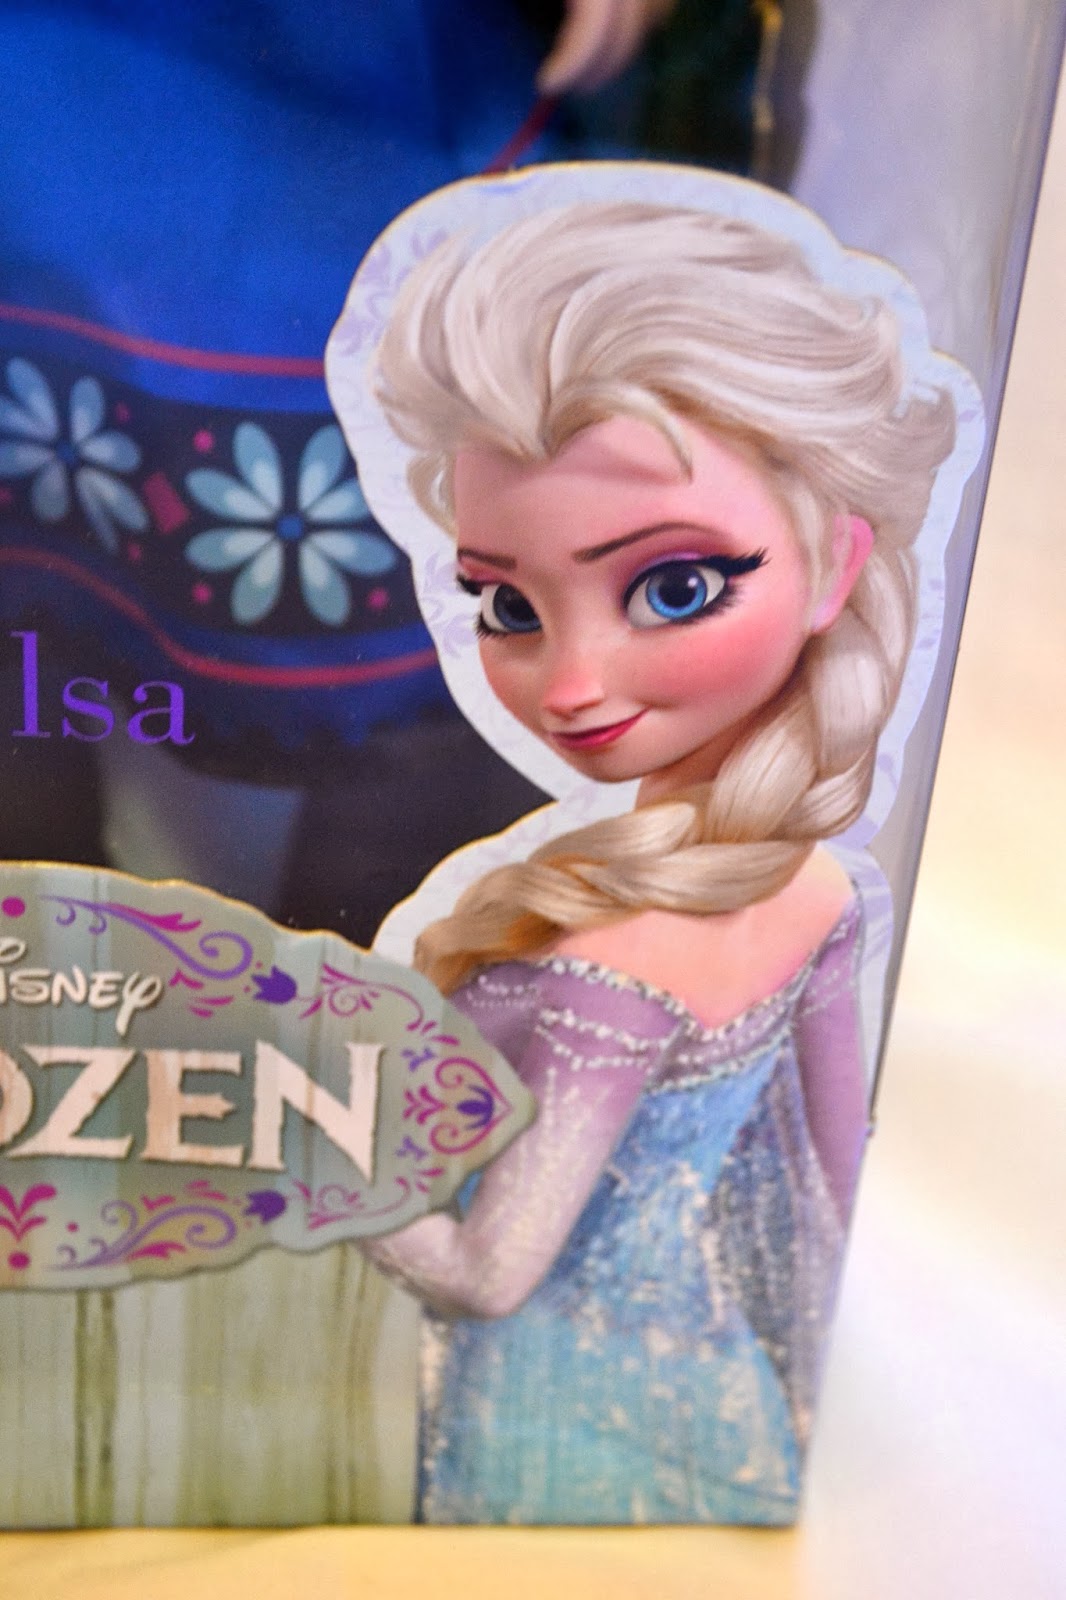 Anna And Elsa Are Packaged In Slim Boxes That Have A Similar Design To